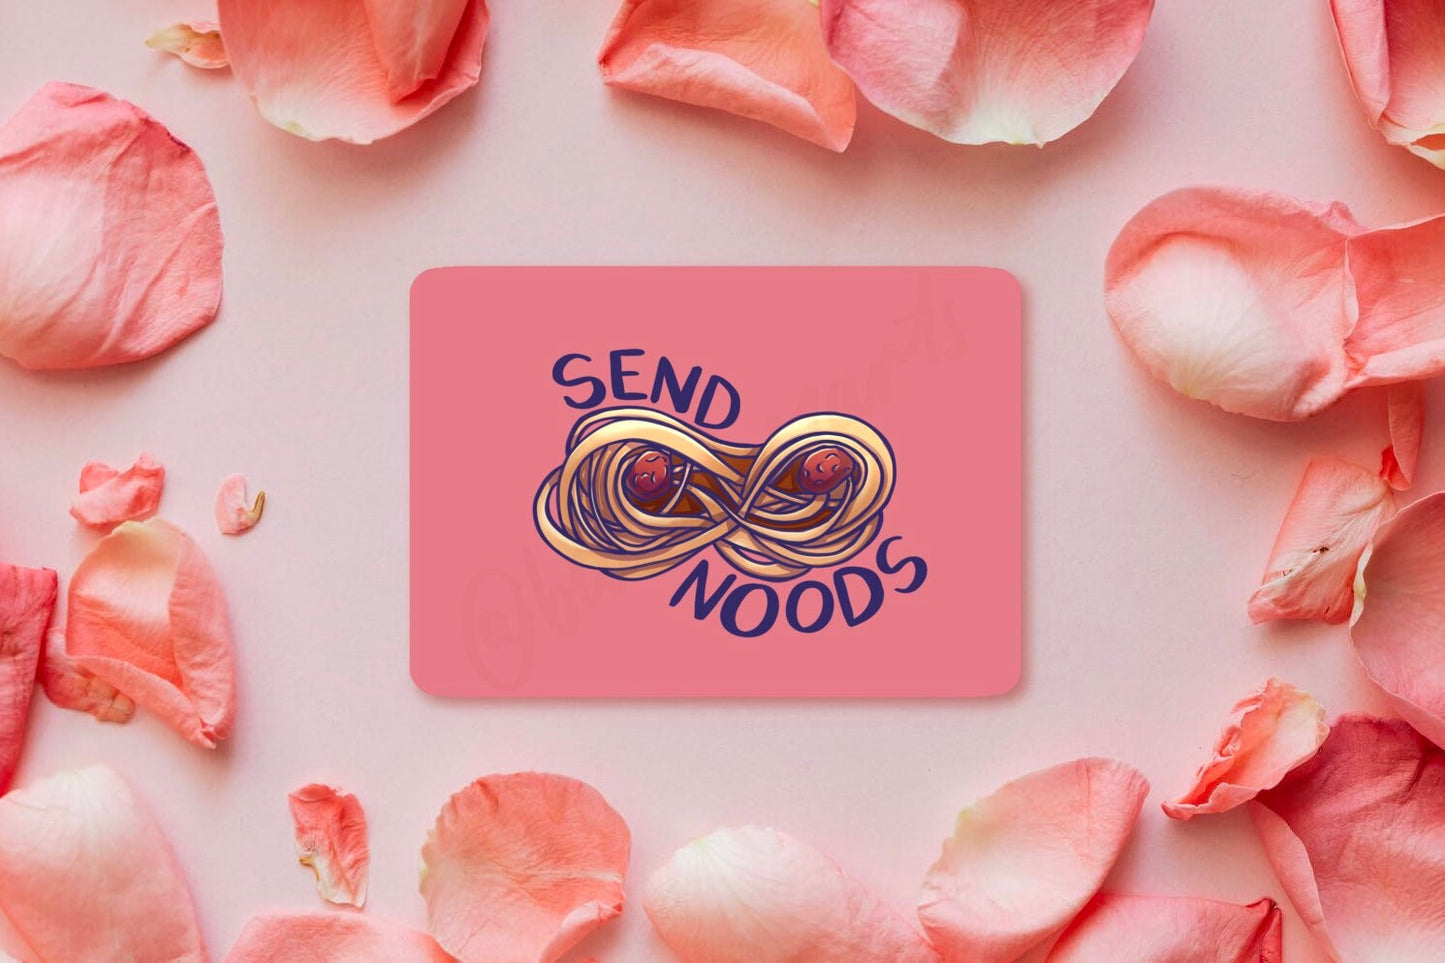 Valentine’s Funny Art Print and Postcard - Send Noodles | Funny Witty Cheeky Lovers Anniversary Valentine’s Day Art Print Postcard